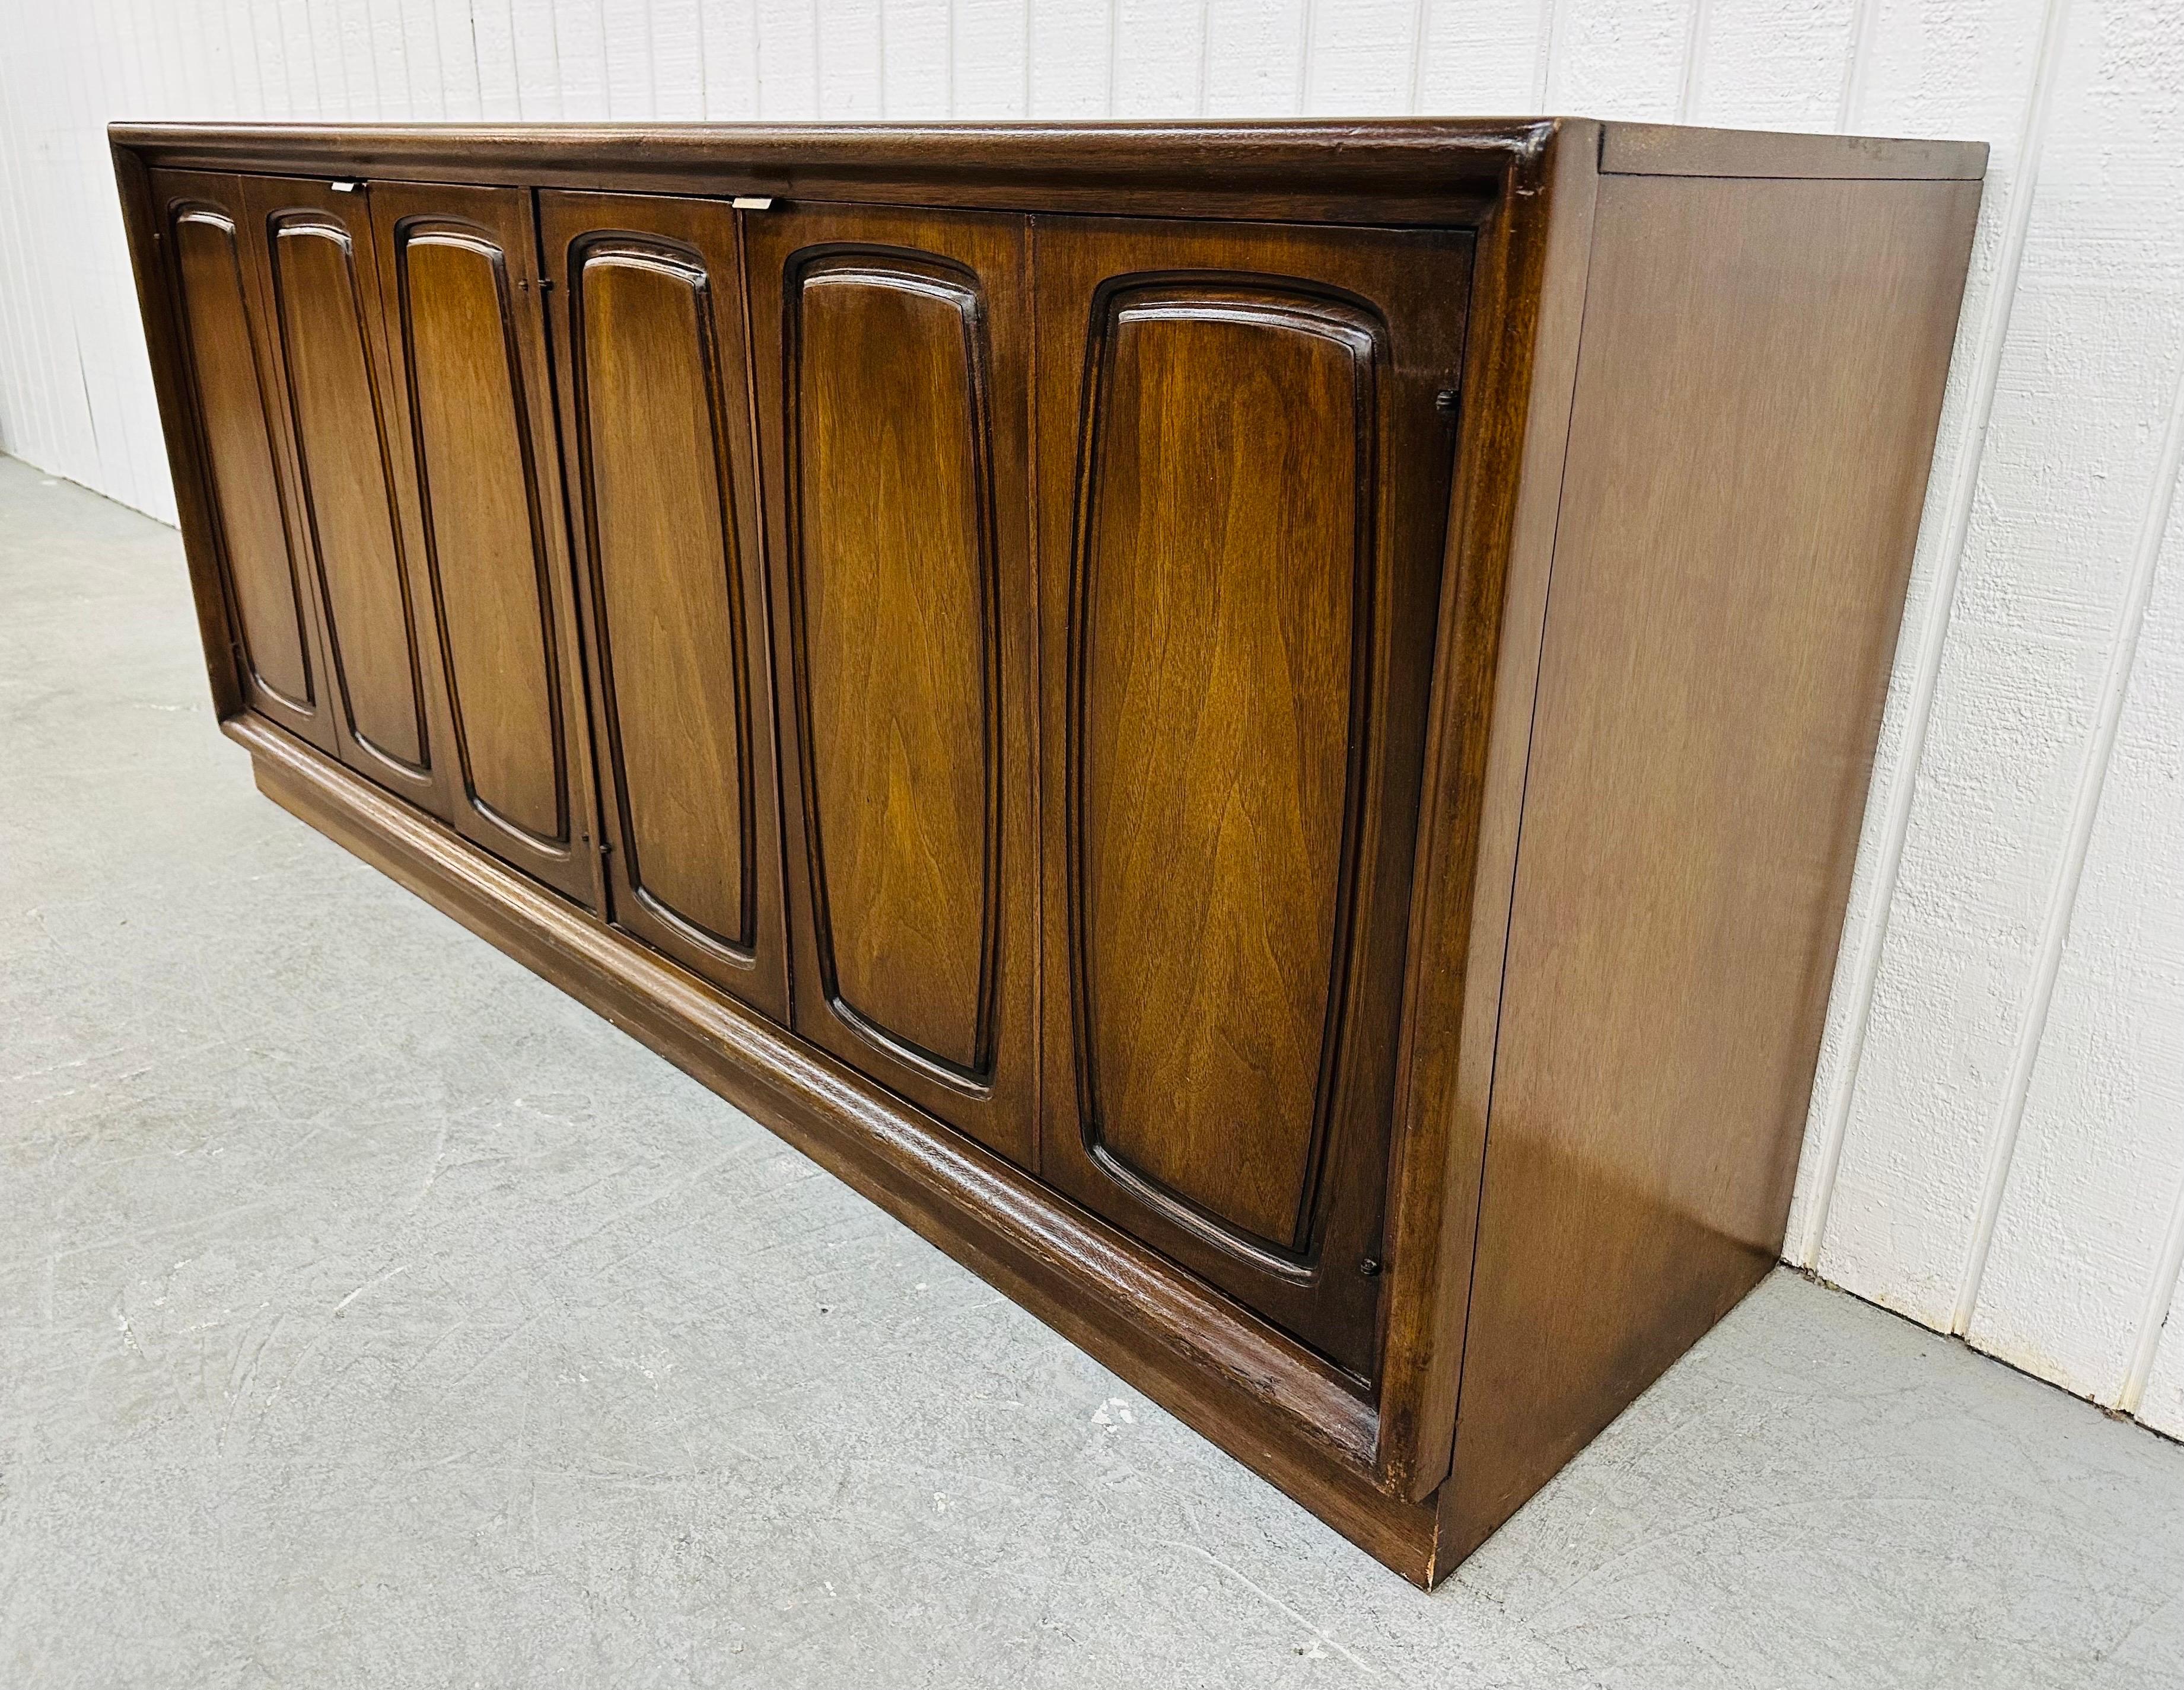 This listing is for a Mid-Century Modern Broyhill Emphasis Walnut Sideboard. Featuring a straight line design, two doors on the left that open up to storage space, two doors on the right that open up to three hidden drawers, a plinth base, and a